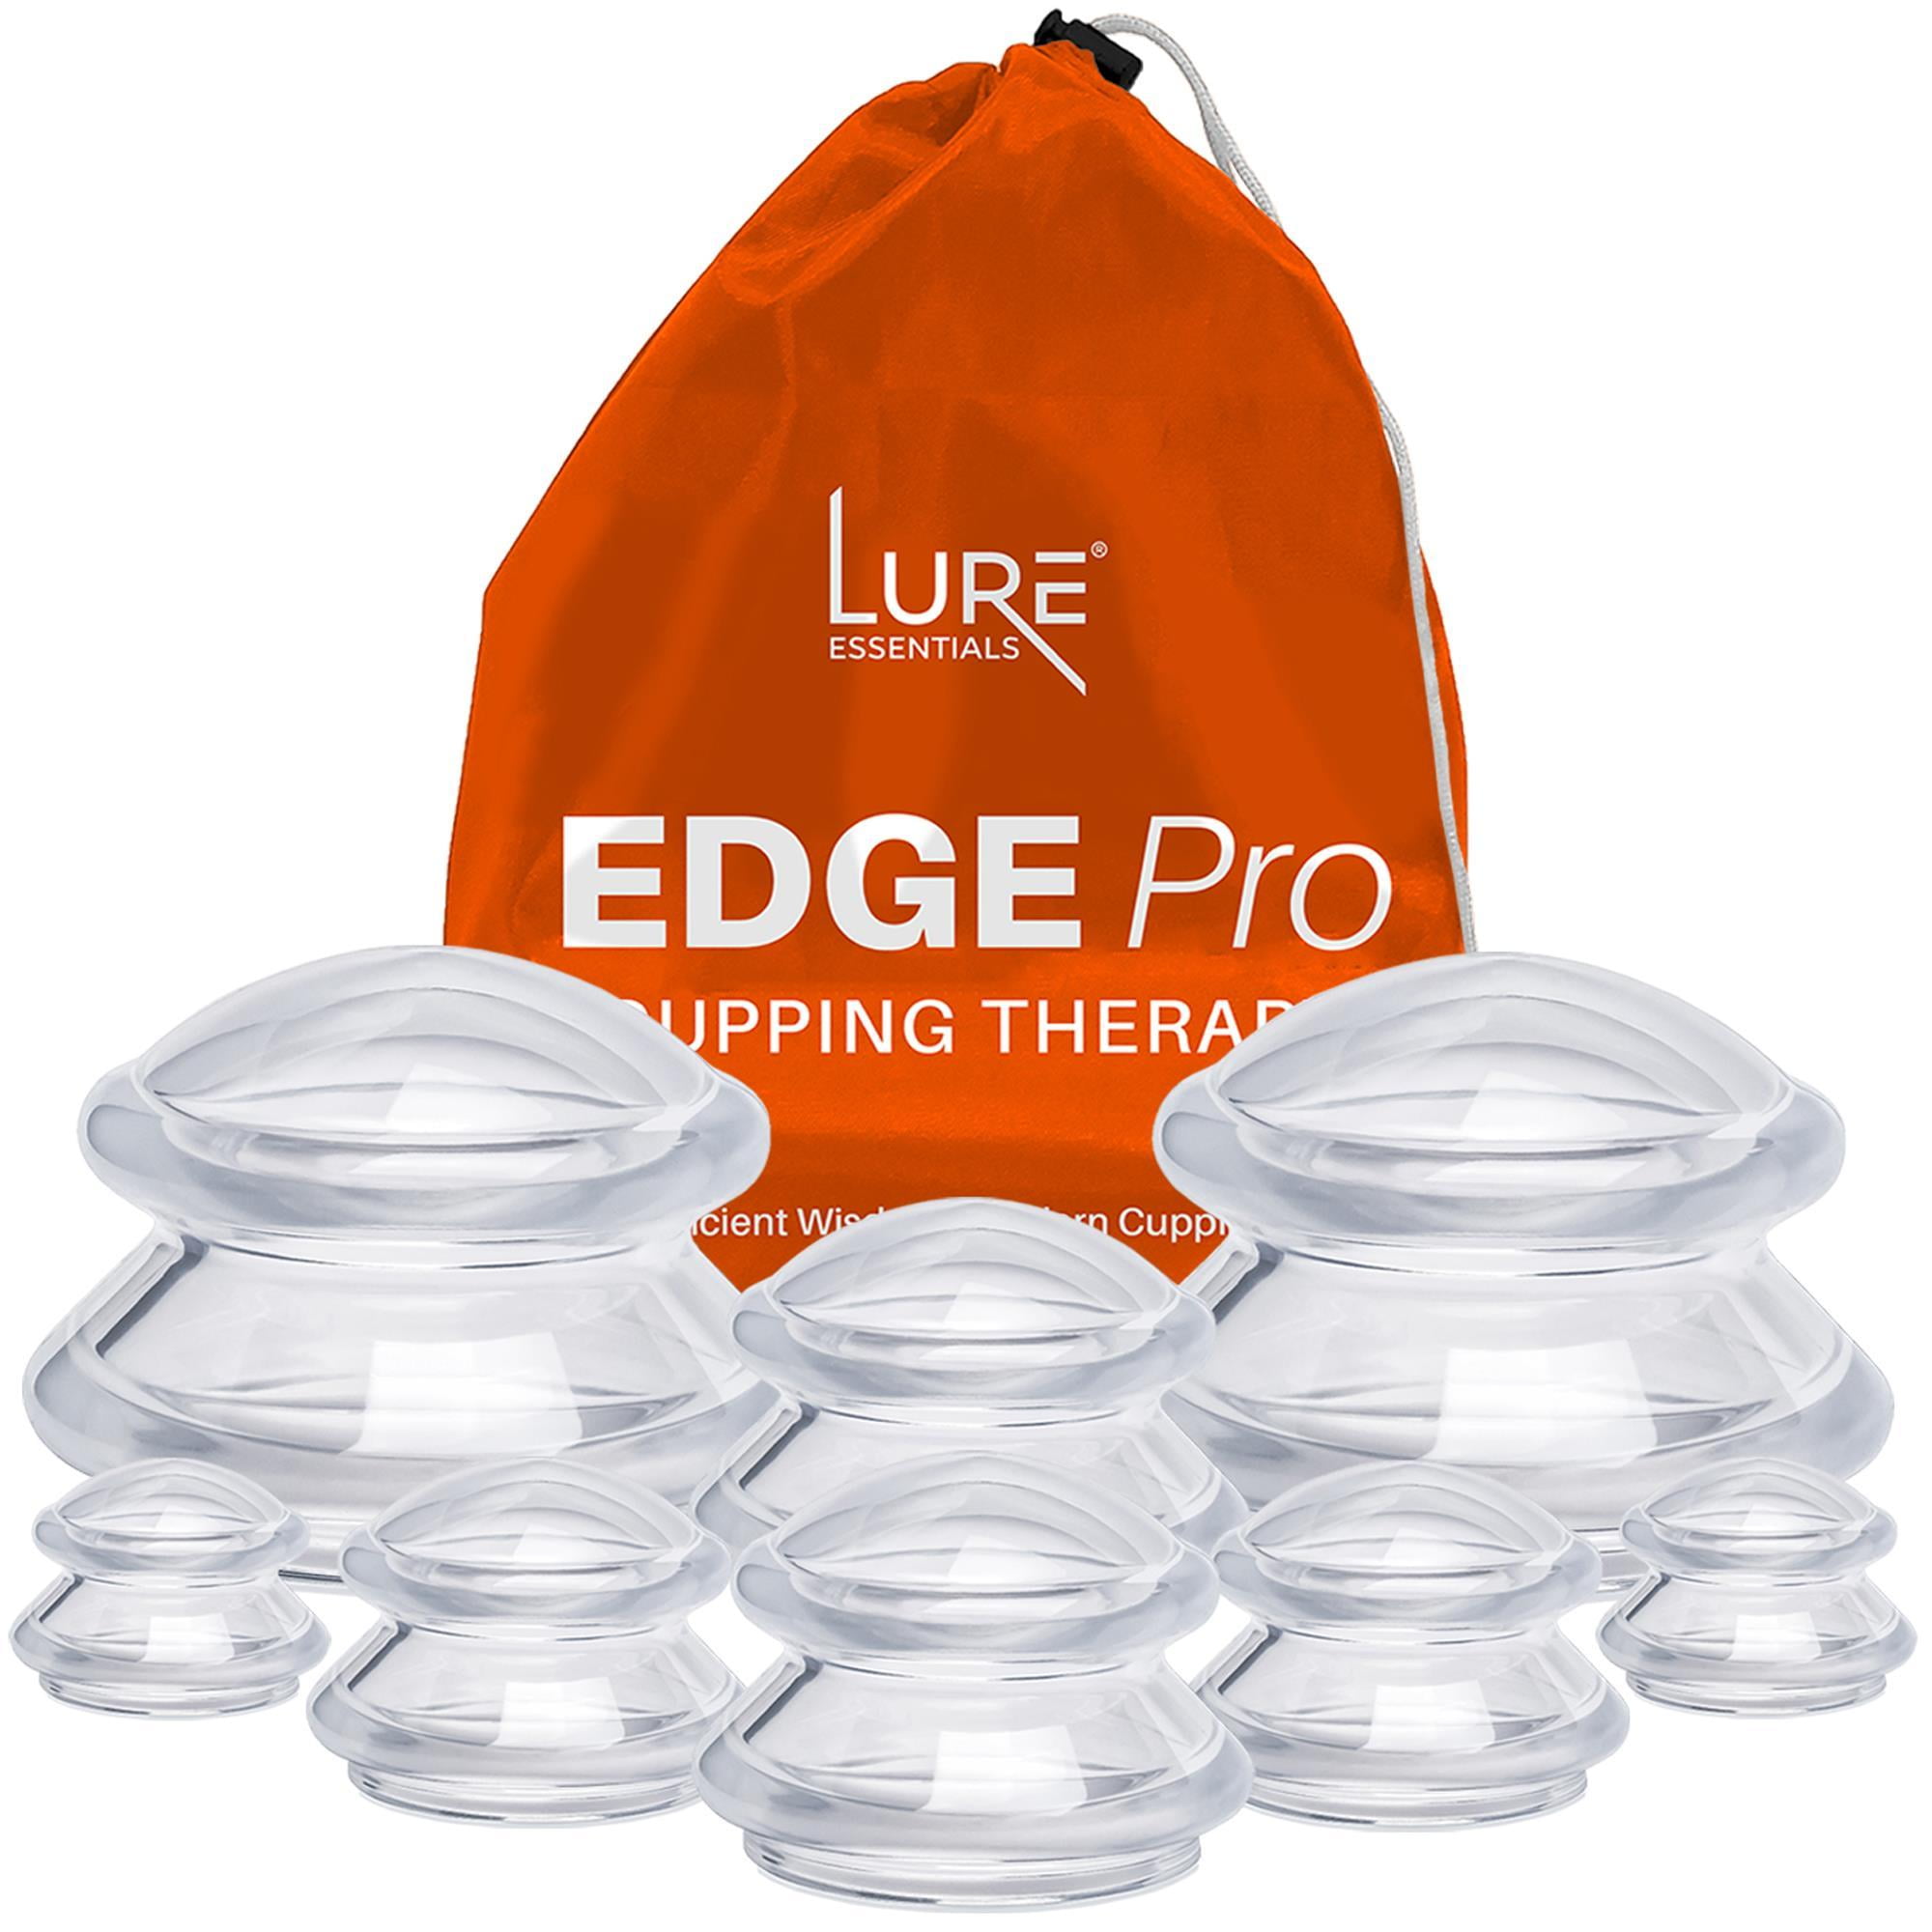 LURE Essentials Edge Cupping Set – Ultra Purple Silicone Cupping Therapy  Set for Cellulite Reduction and Myofascial Release - Massage Therapists and